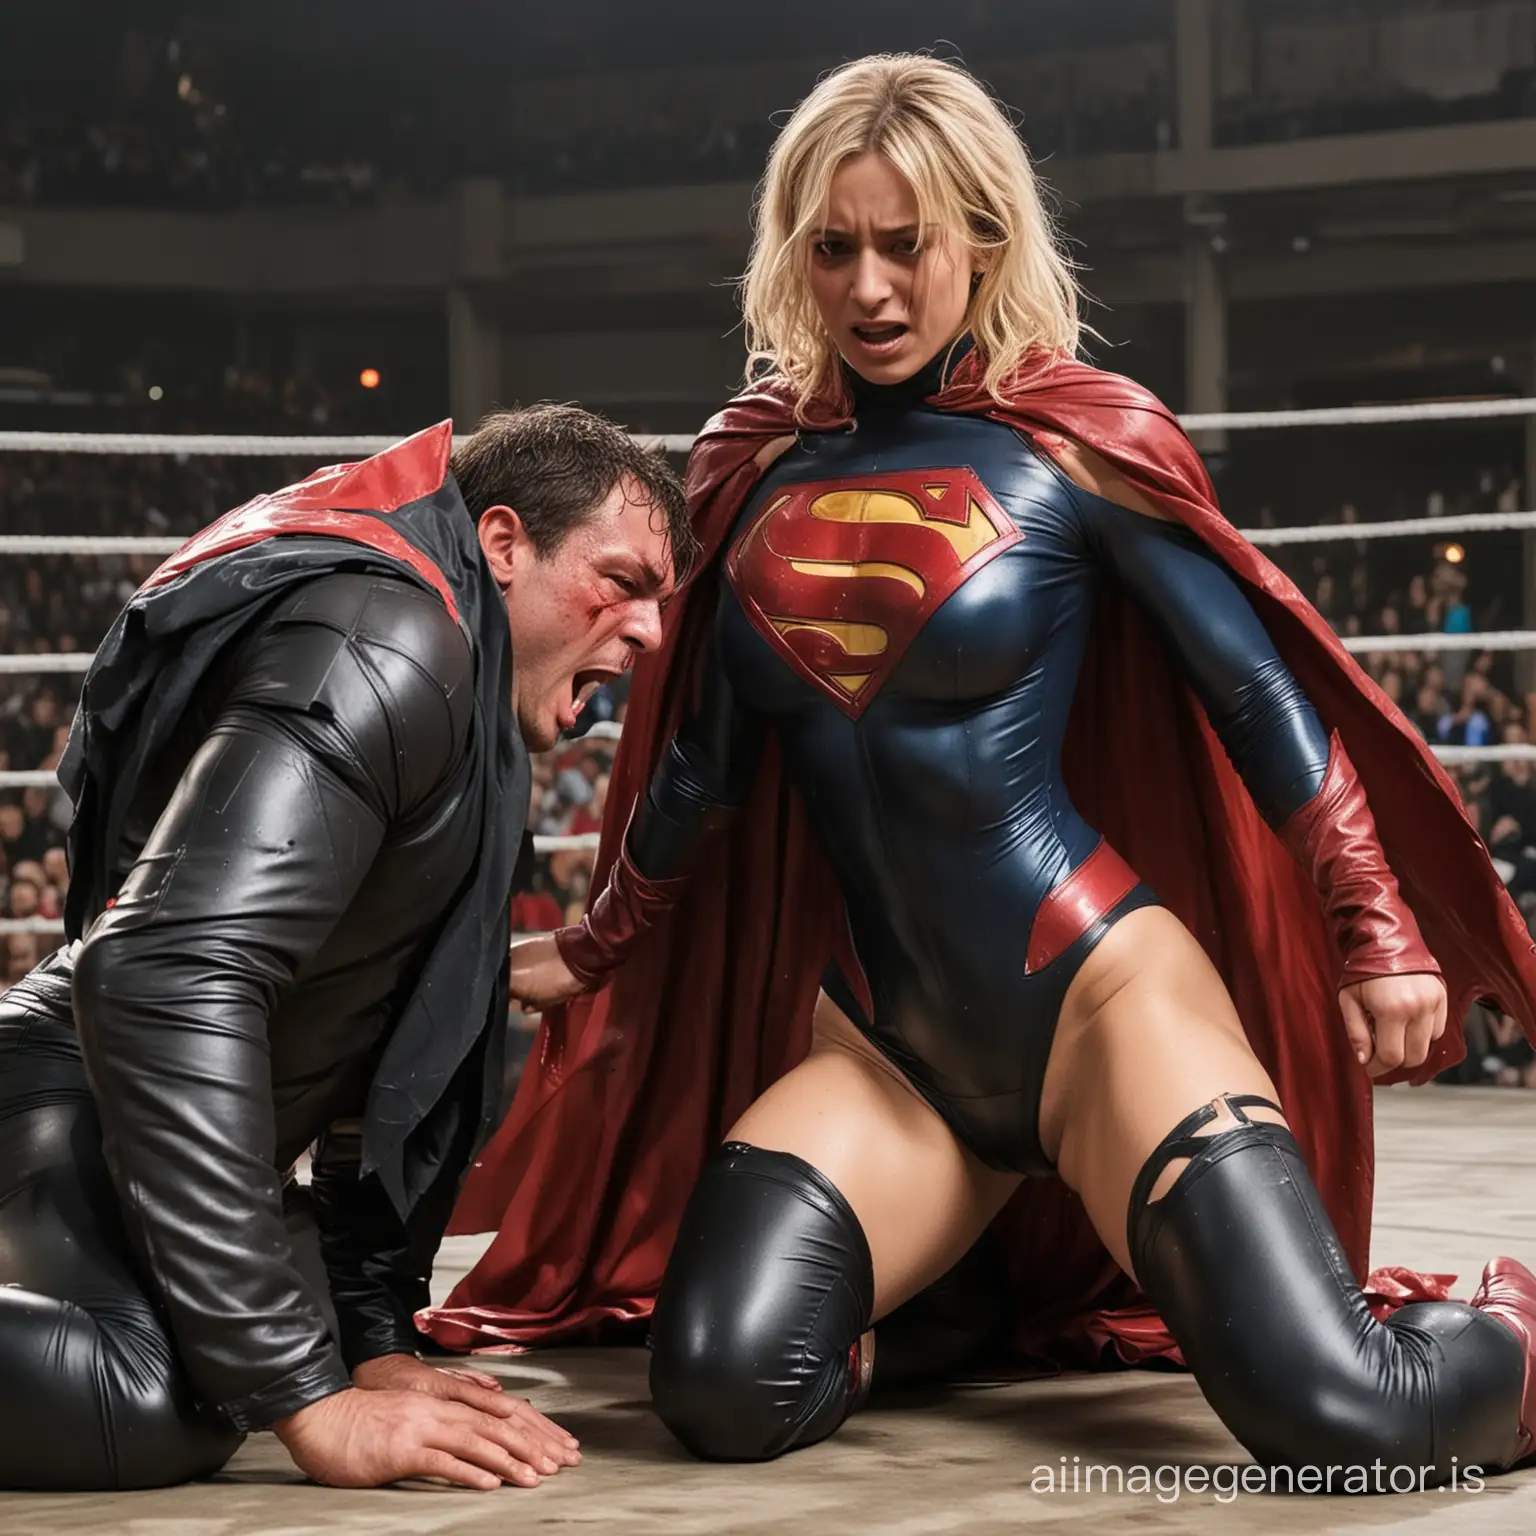 superheroine gets defeated by a male wrestler who holds her stomach with a hand. she is bleeding and sweating and her clothes are ripped apart, but still wearing a cape.
her nipples are slightly exposed because her suit is damaged.